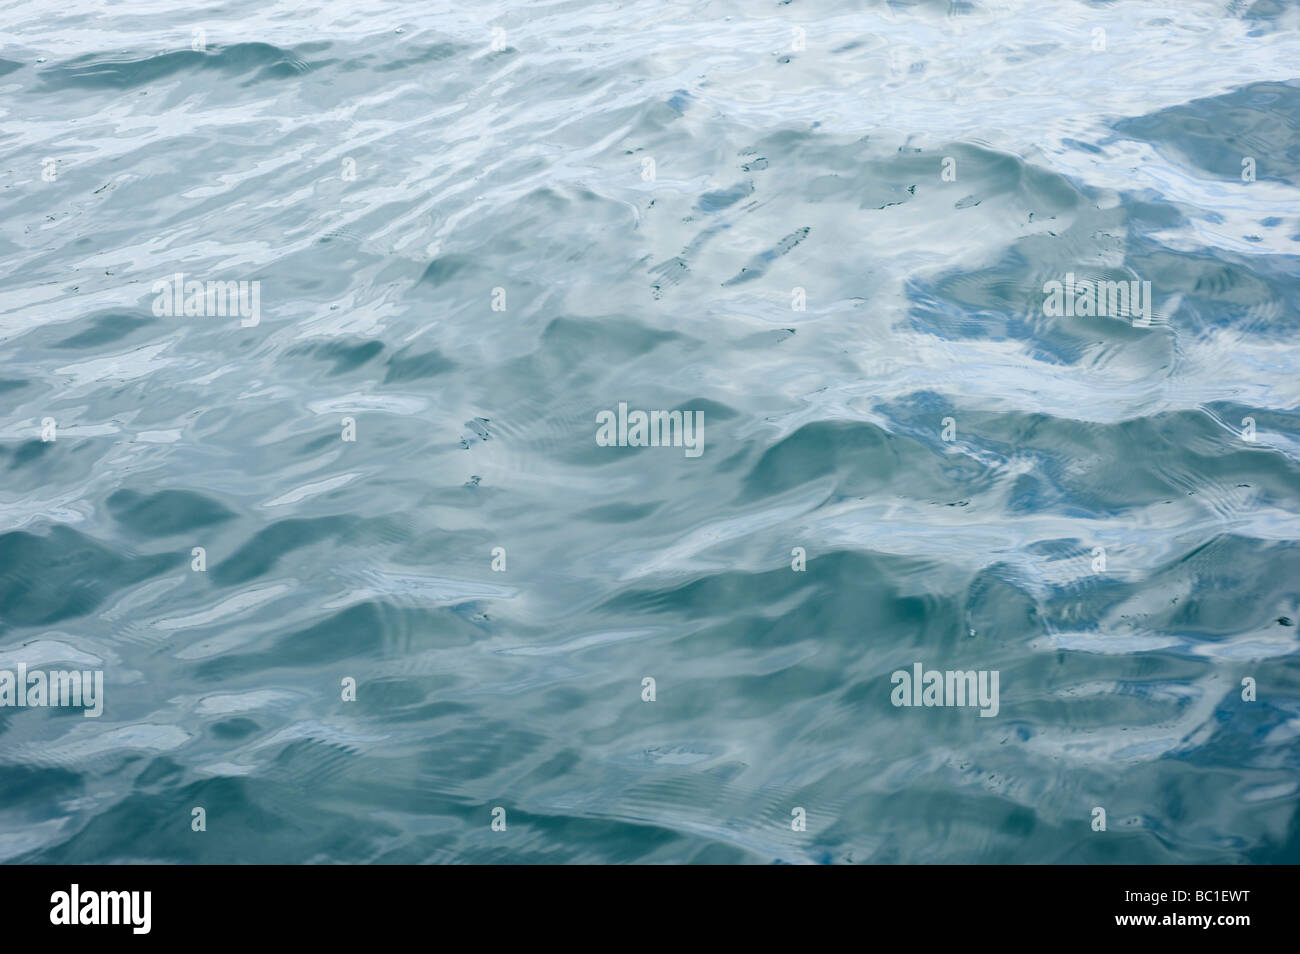 Ocean water surface, abstract concept Stock Photo